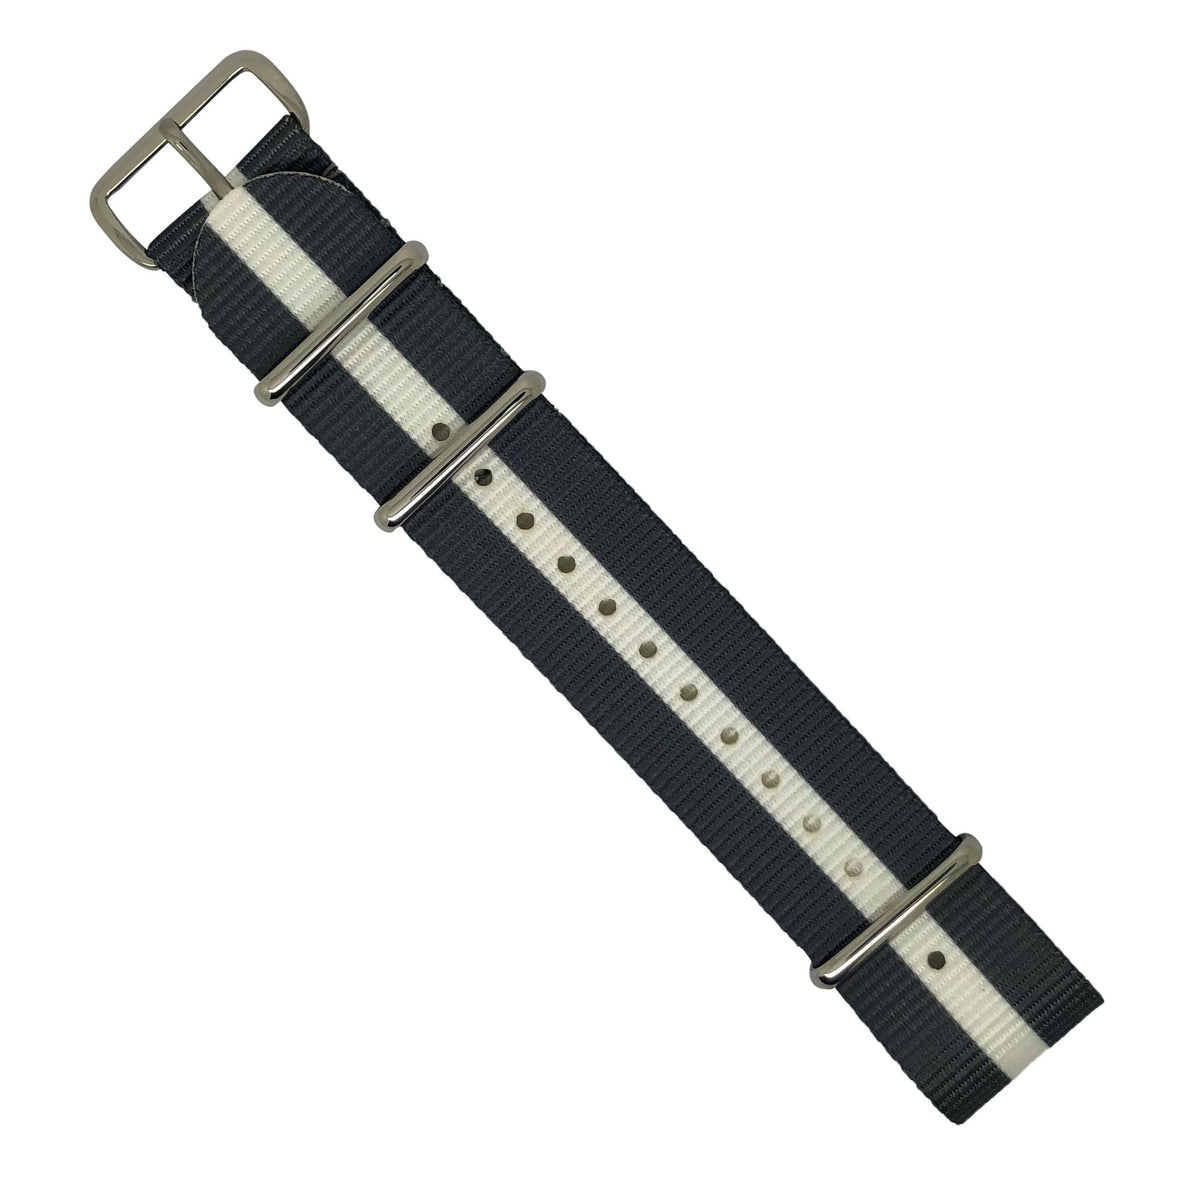 Premium Nato Strap in Grey White with Polished Silver Buckle (22mm) - Nomad Watch Works Malaysia